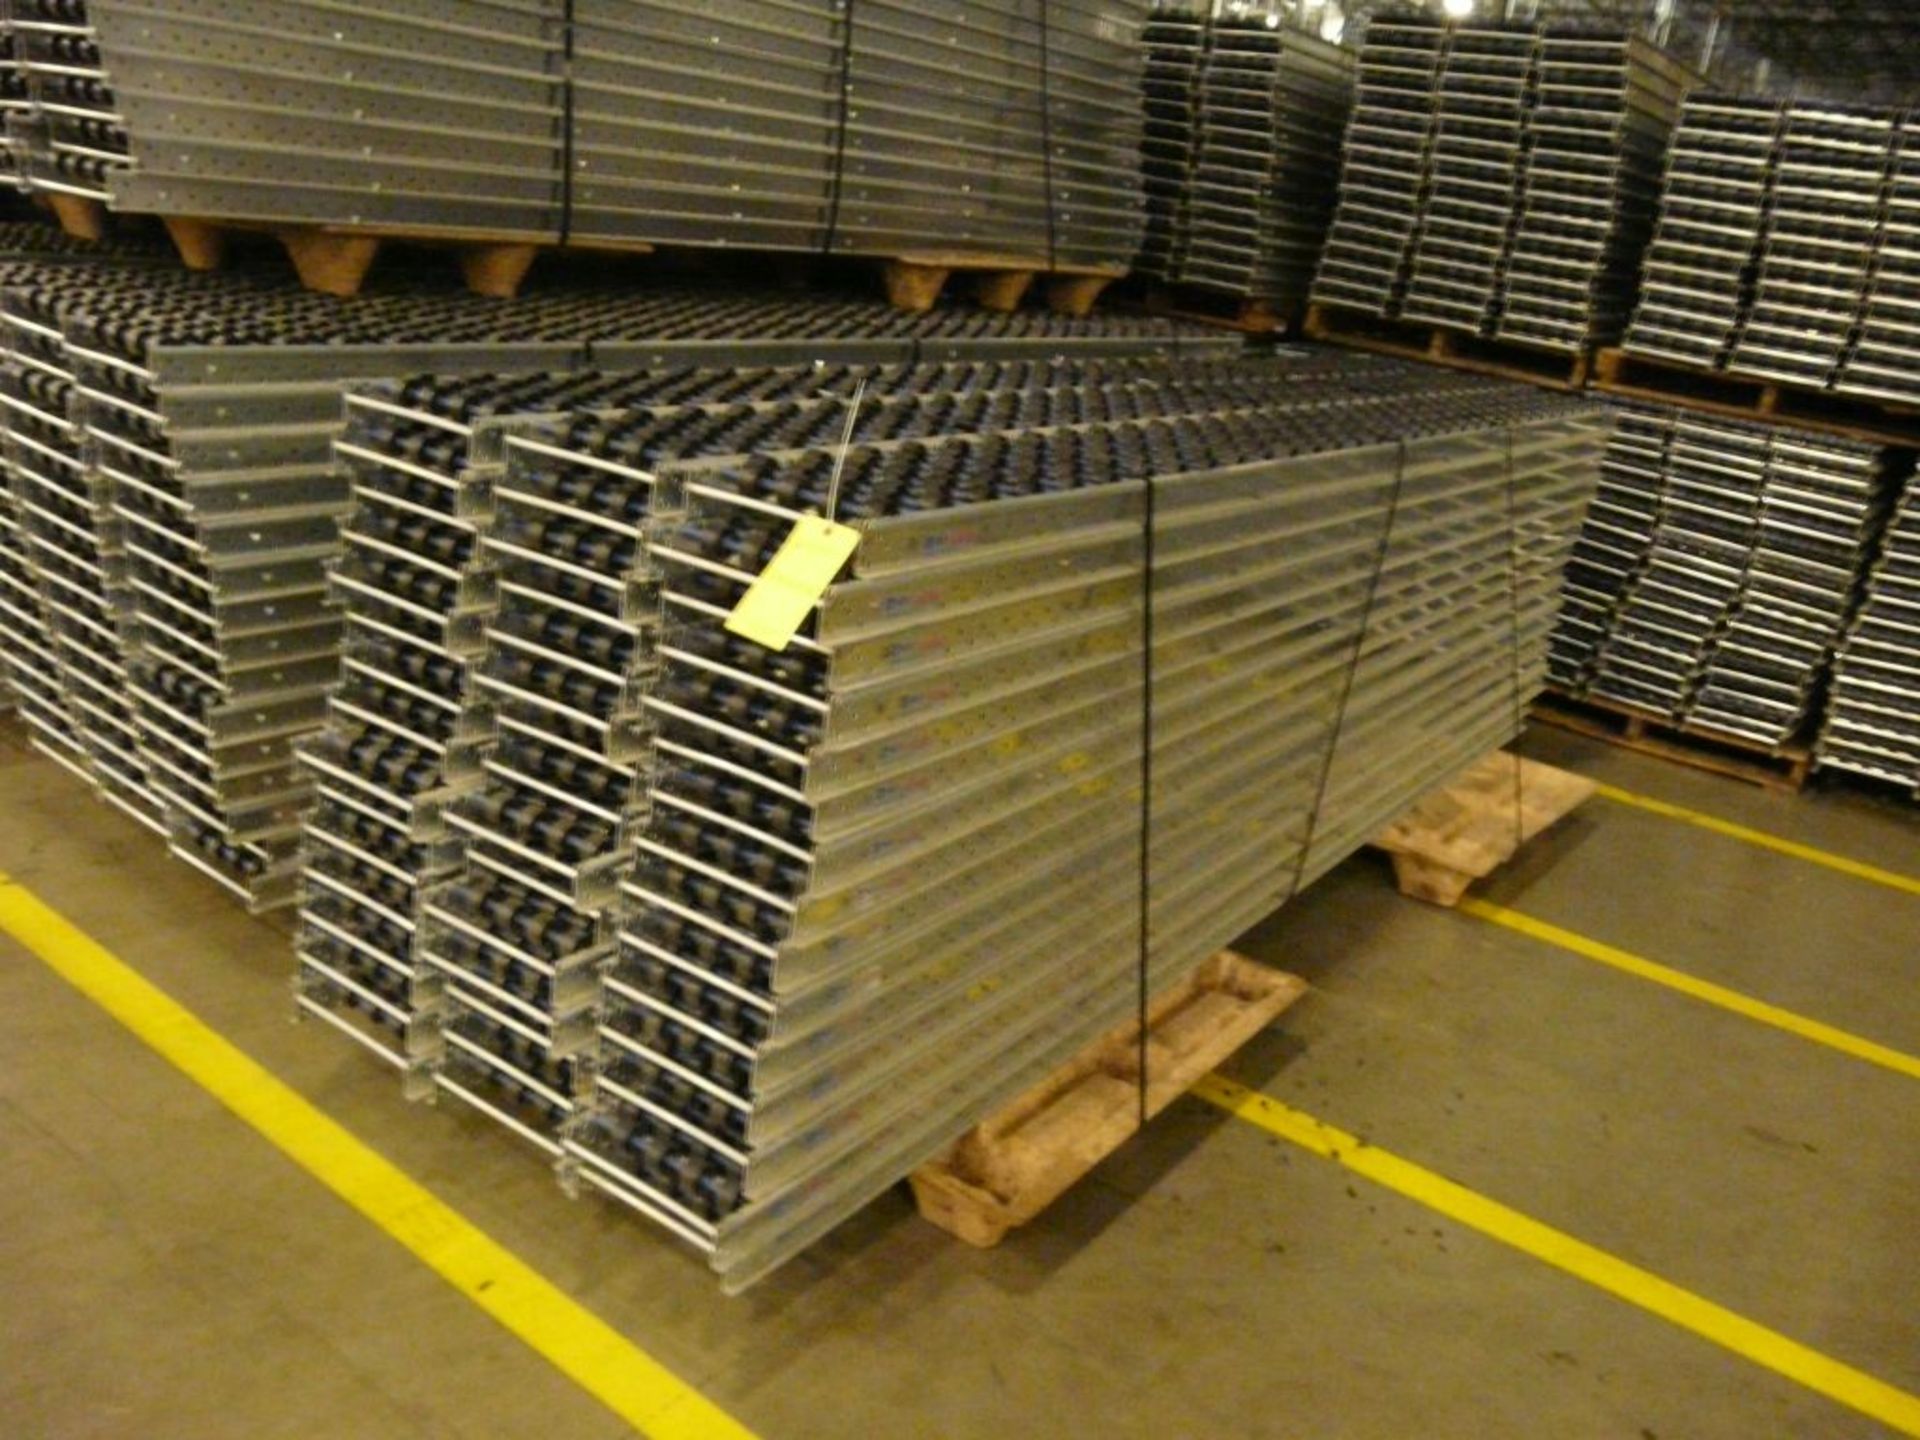 Lot of (90) SpanTrack Wheelbed Carton Flow Conveyors - 11.5'L x 11"W; Tag: 223557 - $30 Lot